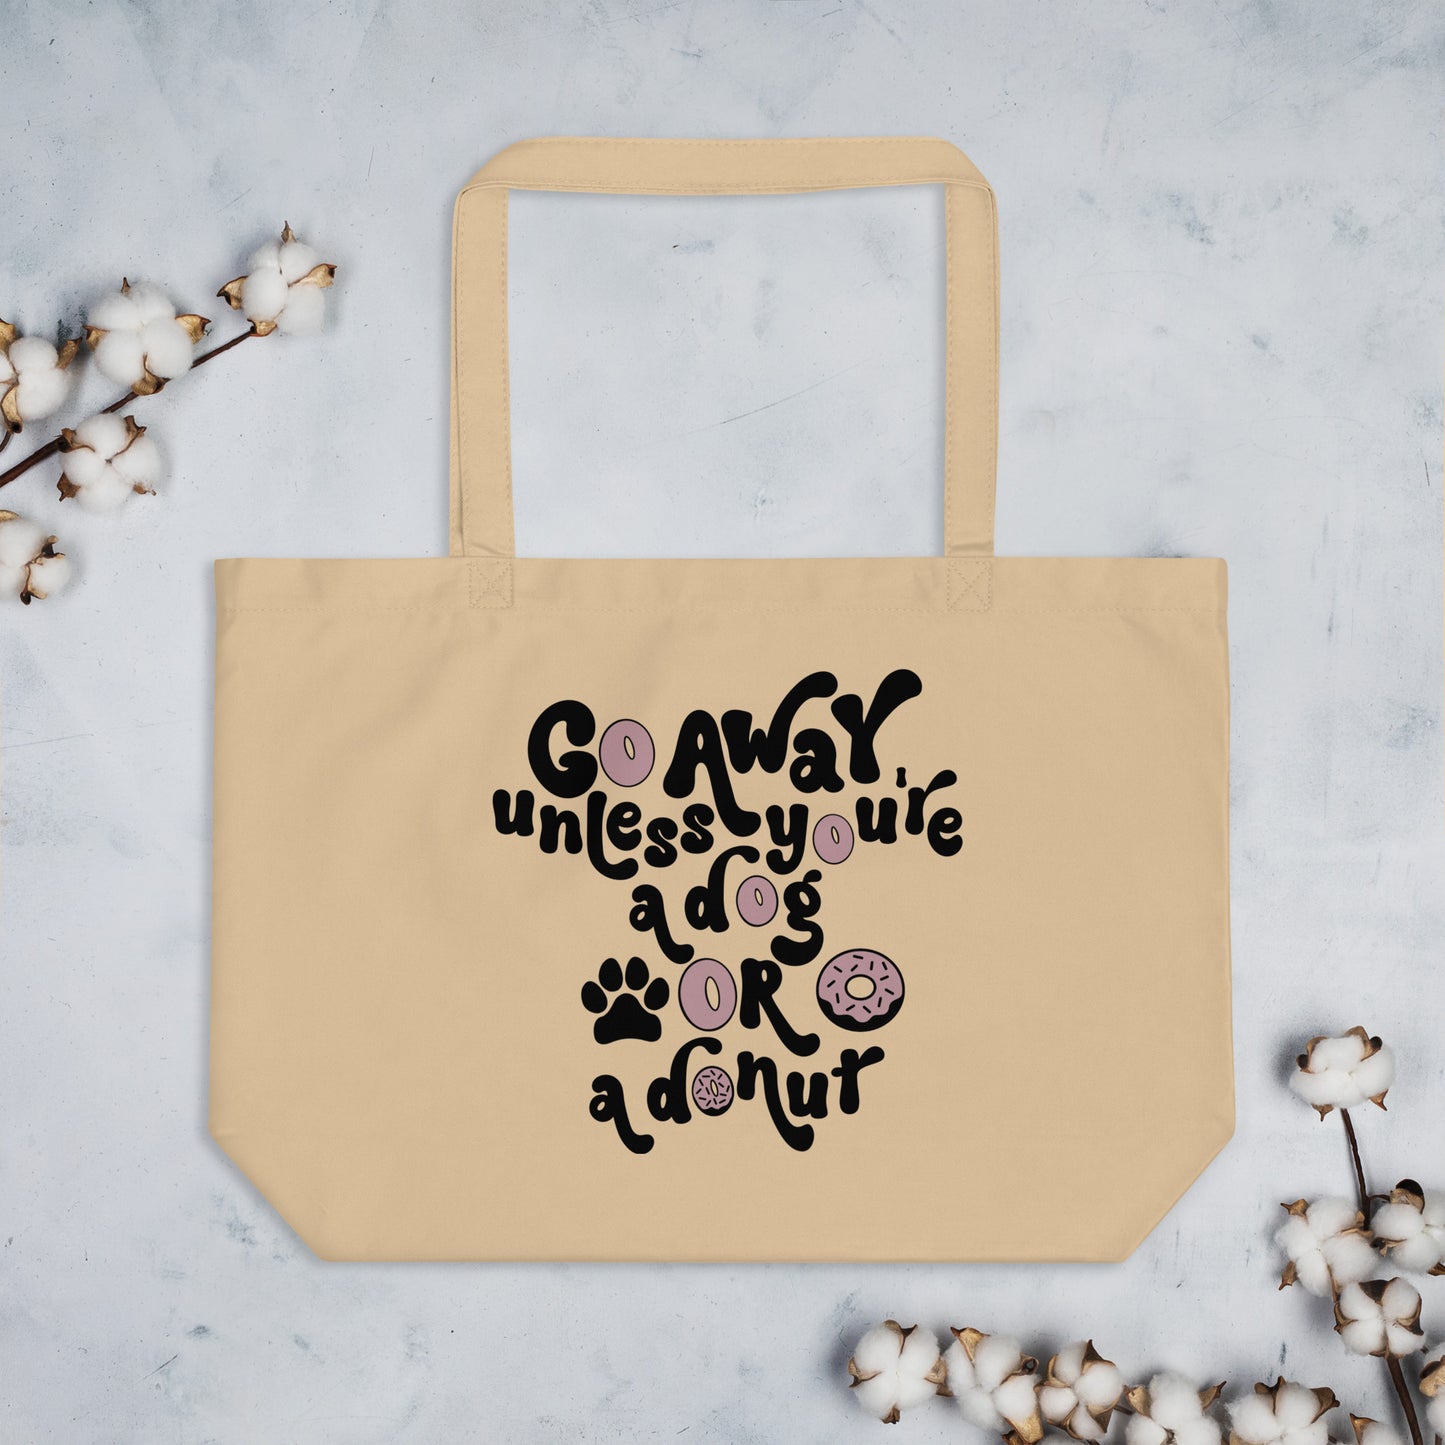 Go Away Unless You're A Dog Or A Donut Large 100% Organic Cotton Tote